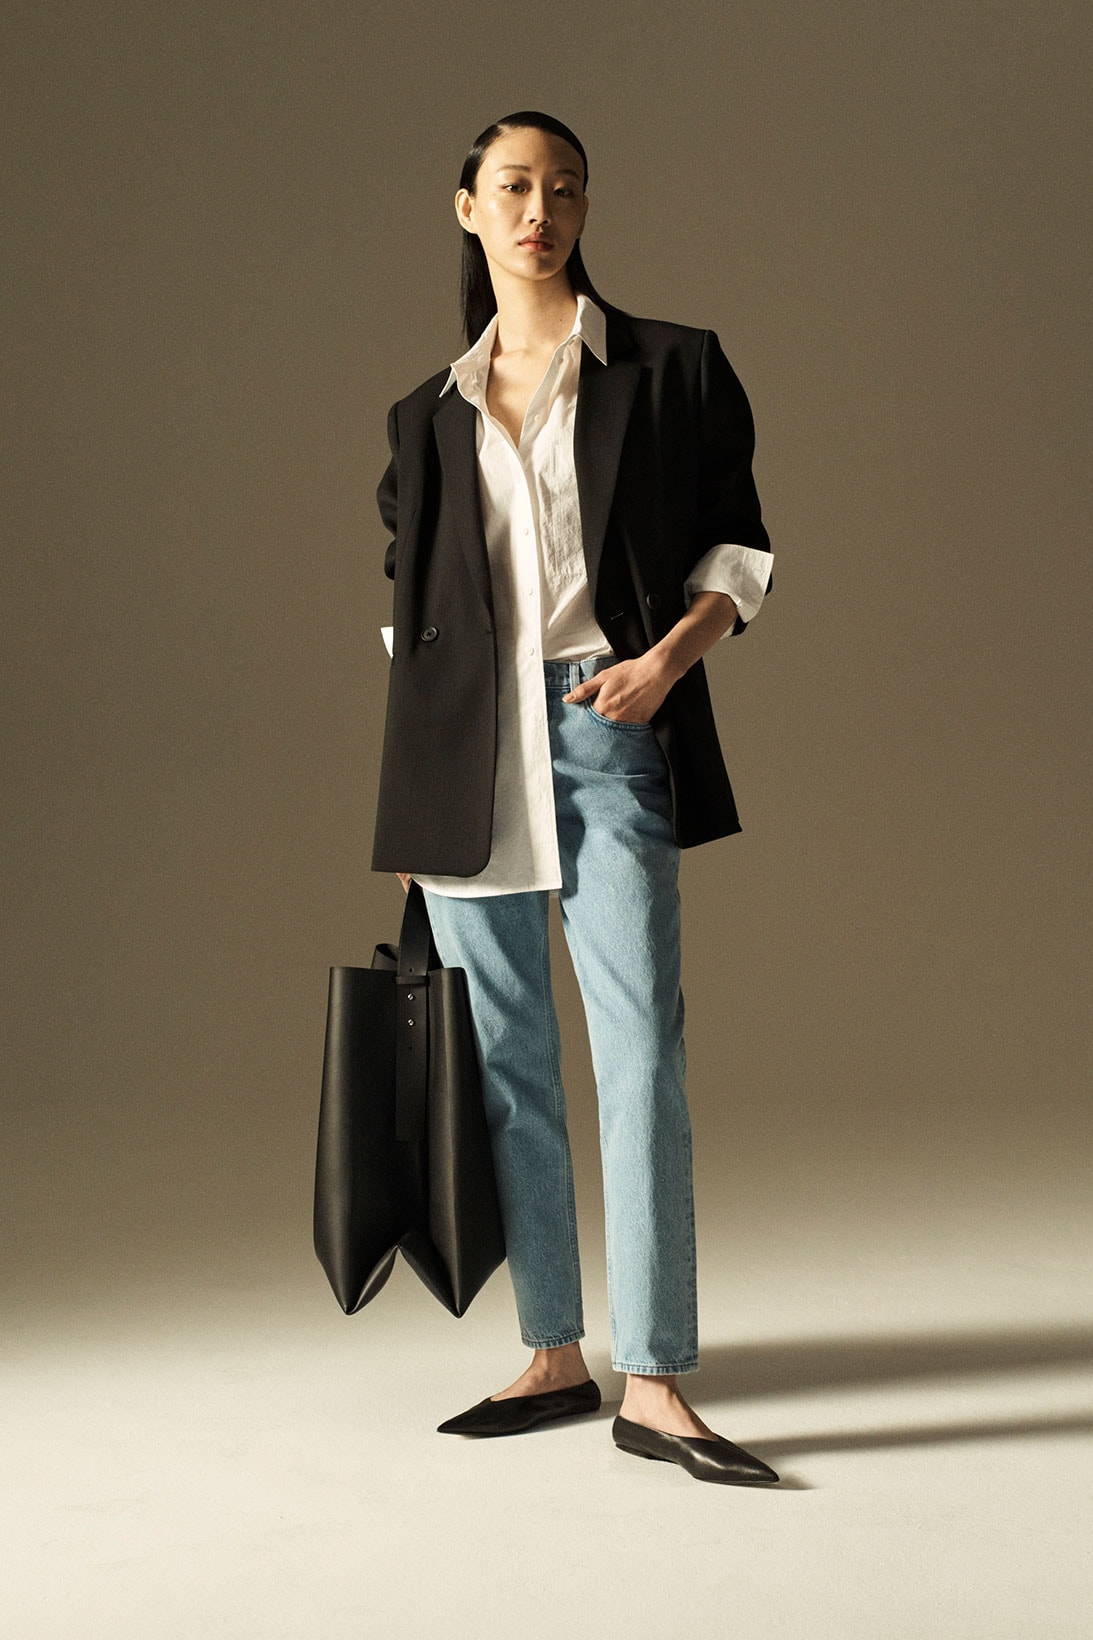 cos spring summer 2021 ss21 sustainable denim collection jeans sora choi blazer shirt flats